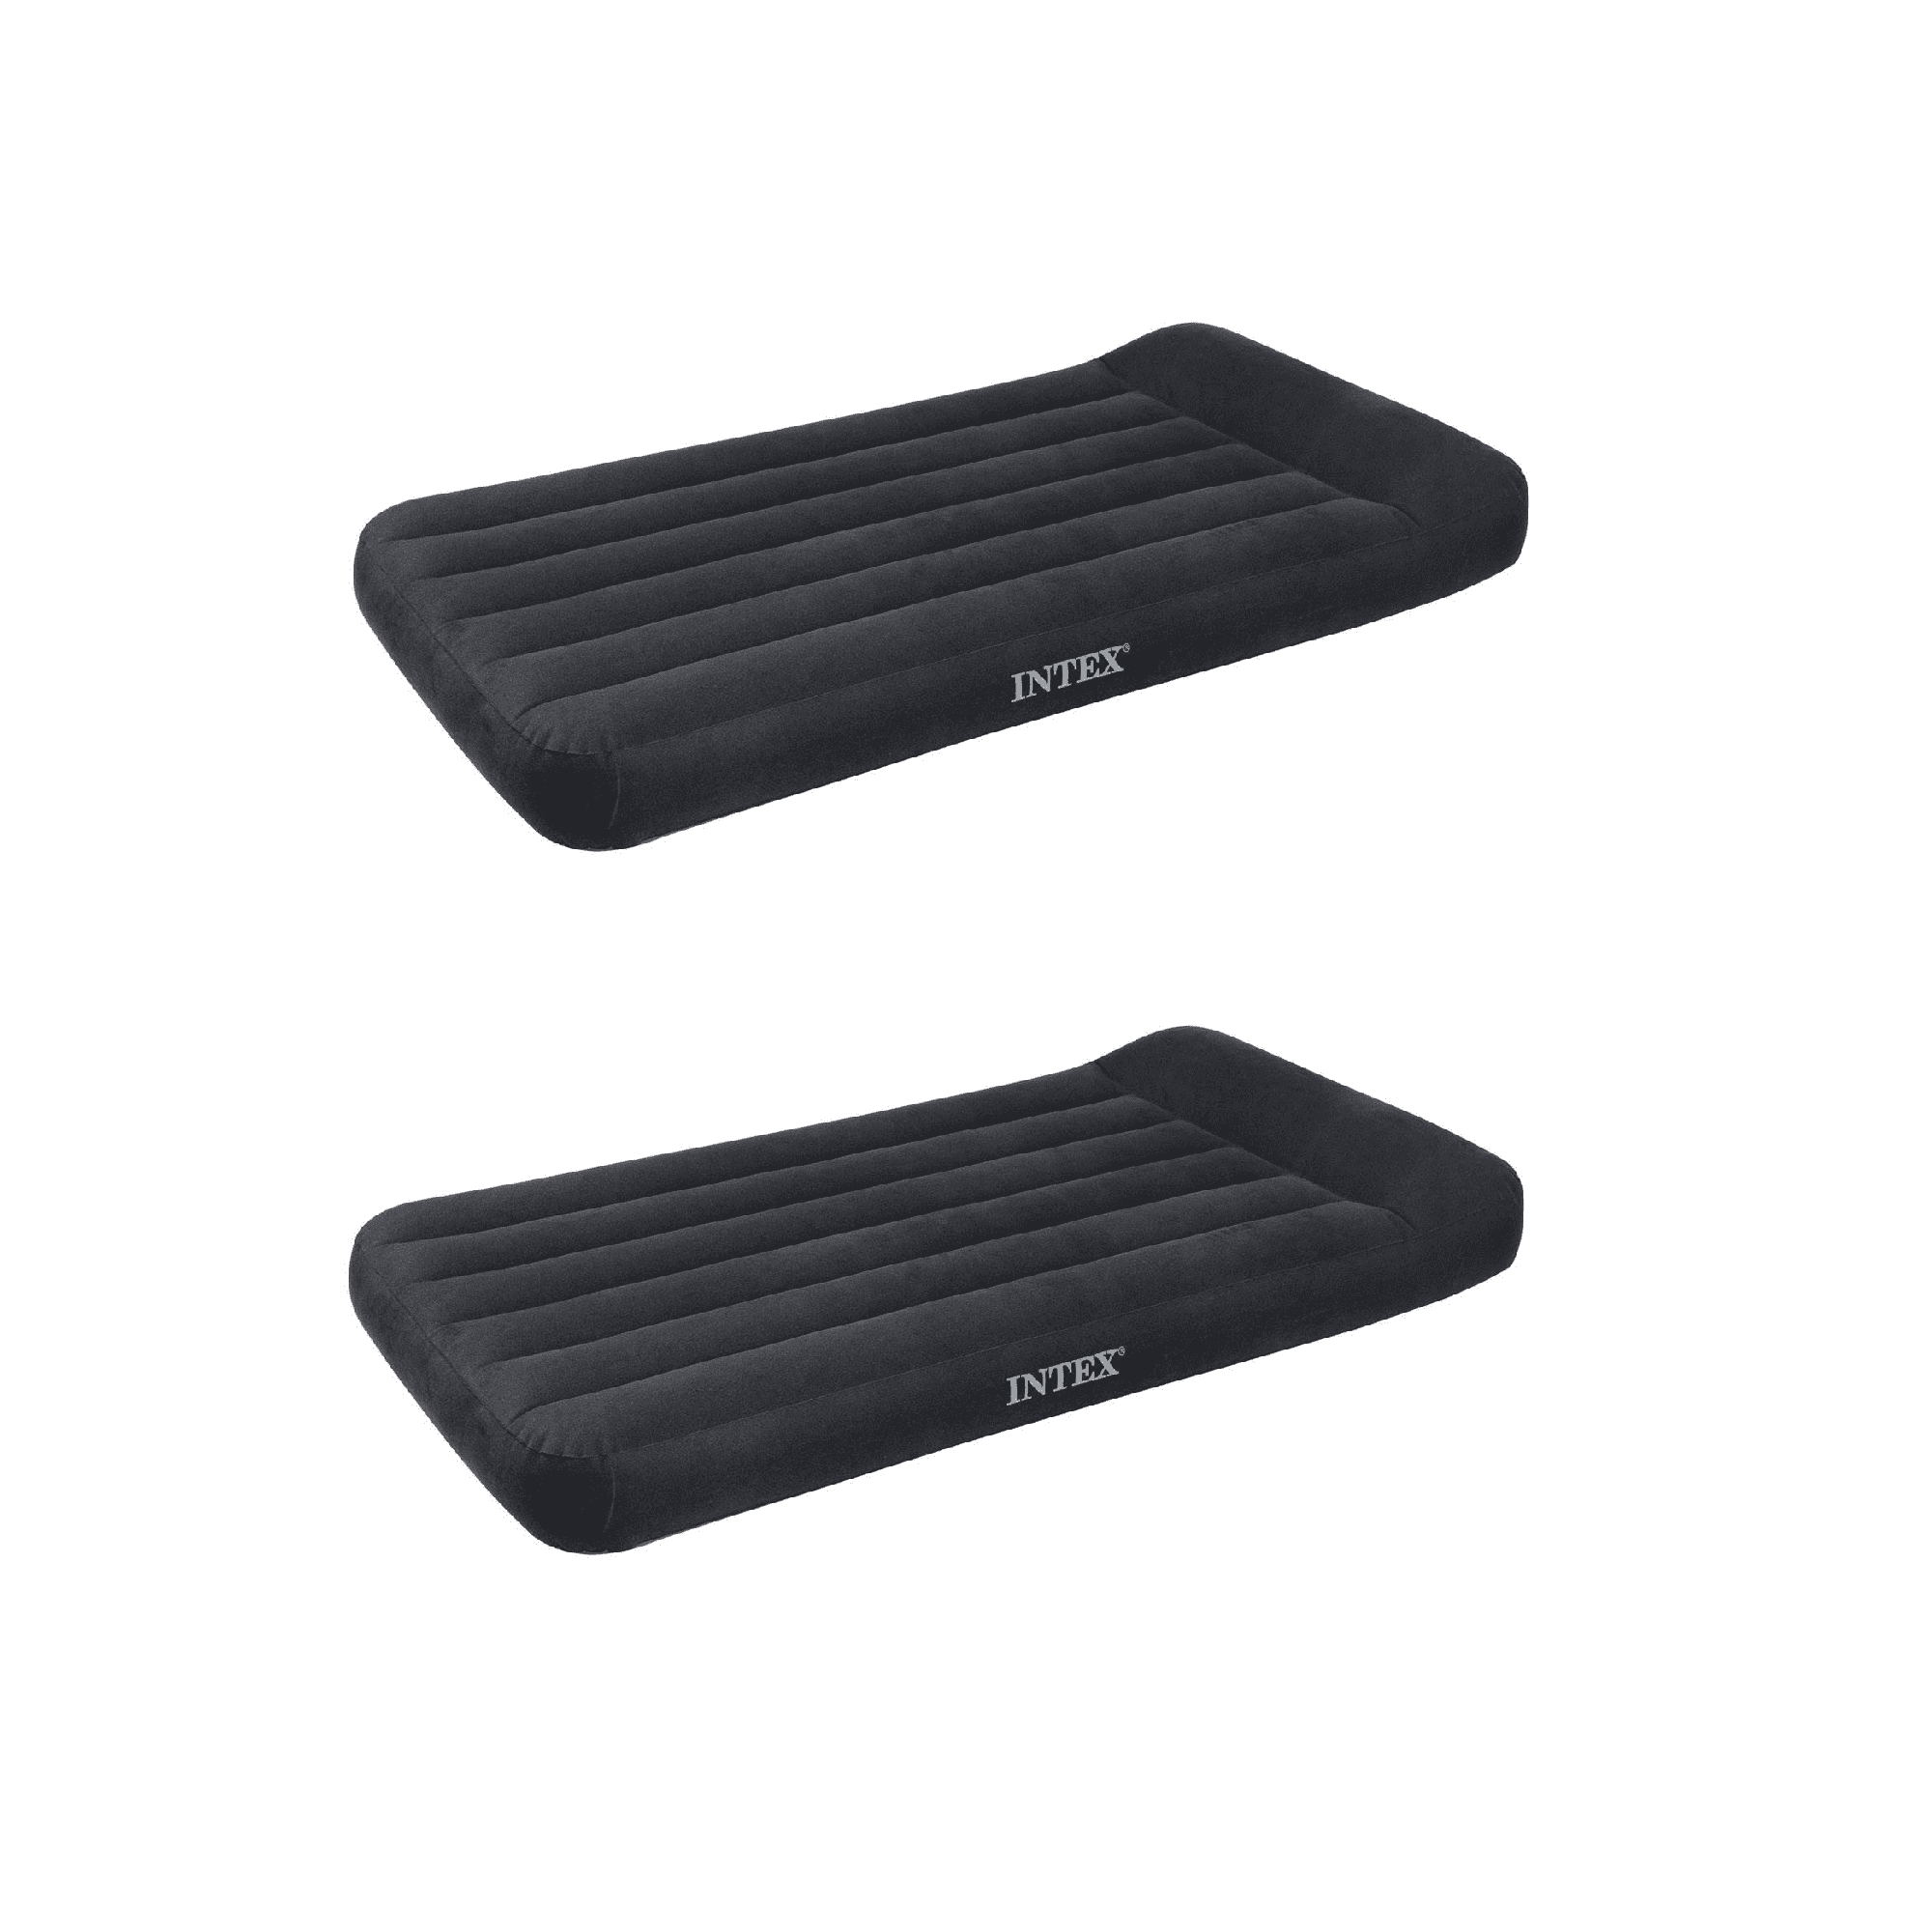 Intex Pillow Rest Classic Blue Standard Airbed w/ Built In Pump, Twin (2 Pack)